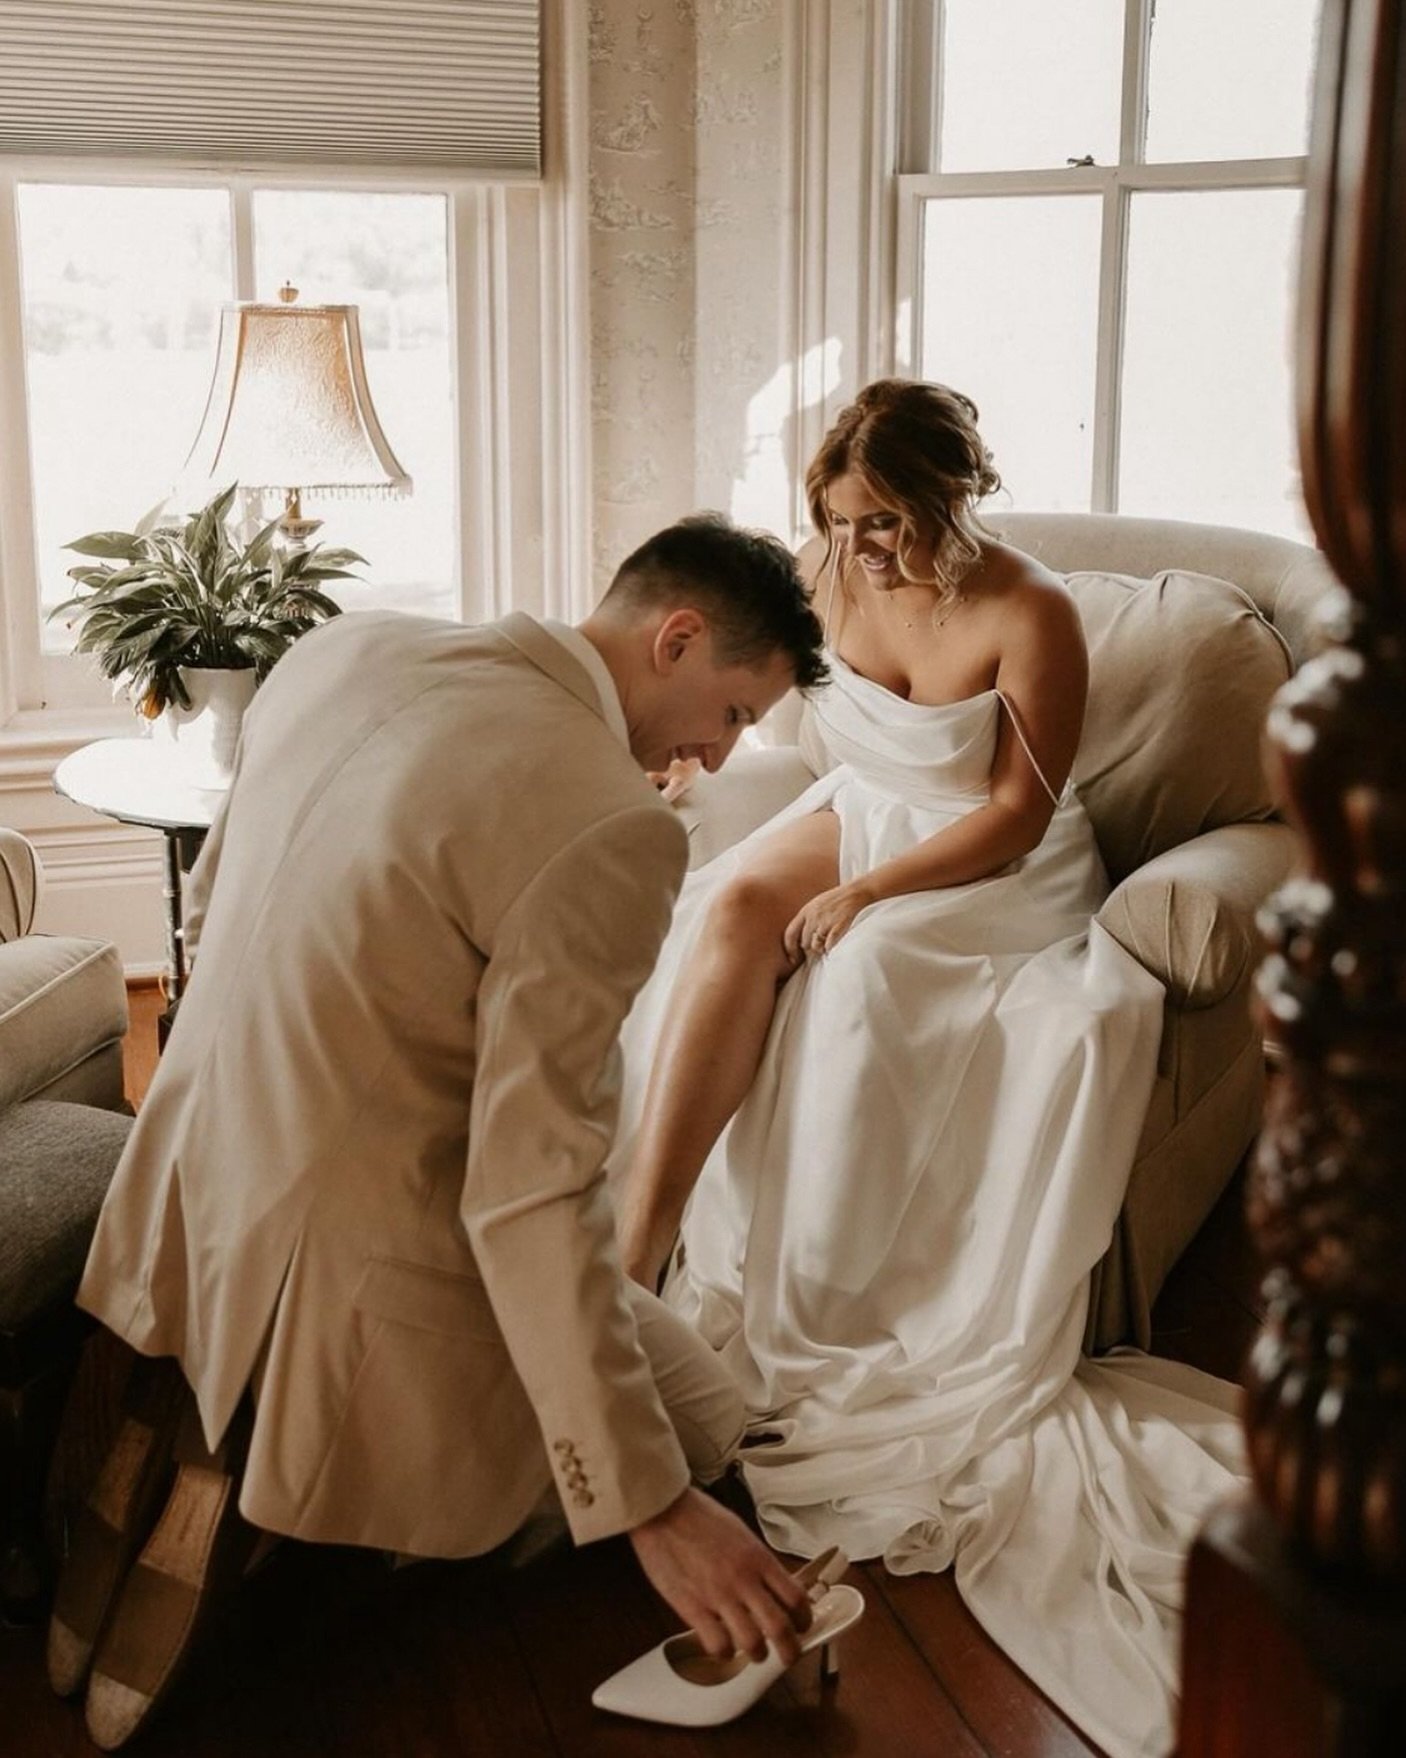 I have seen photos of a few couples getting ready together for their wedding and there is something so romantic and intimate about it. Would you get ready for your wedding with your partner?